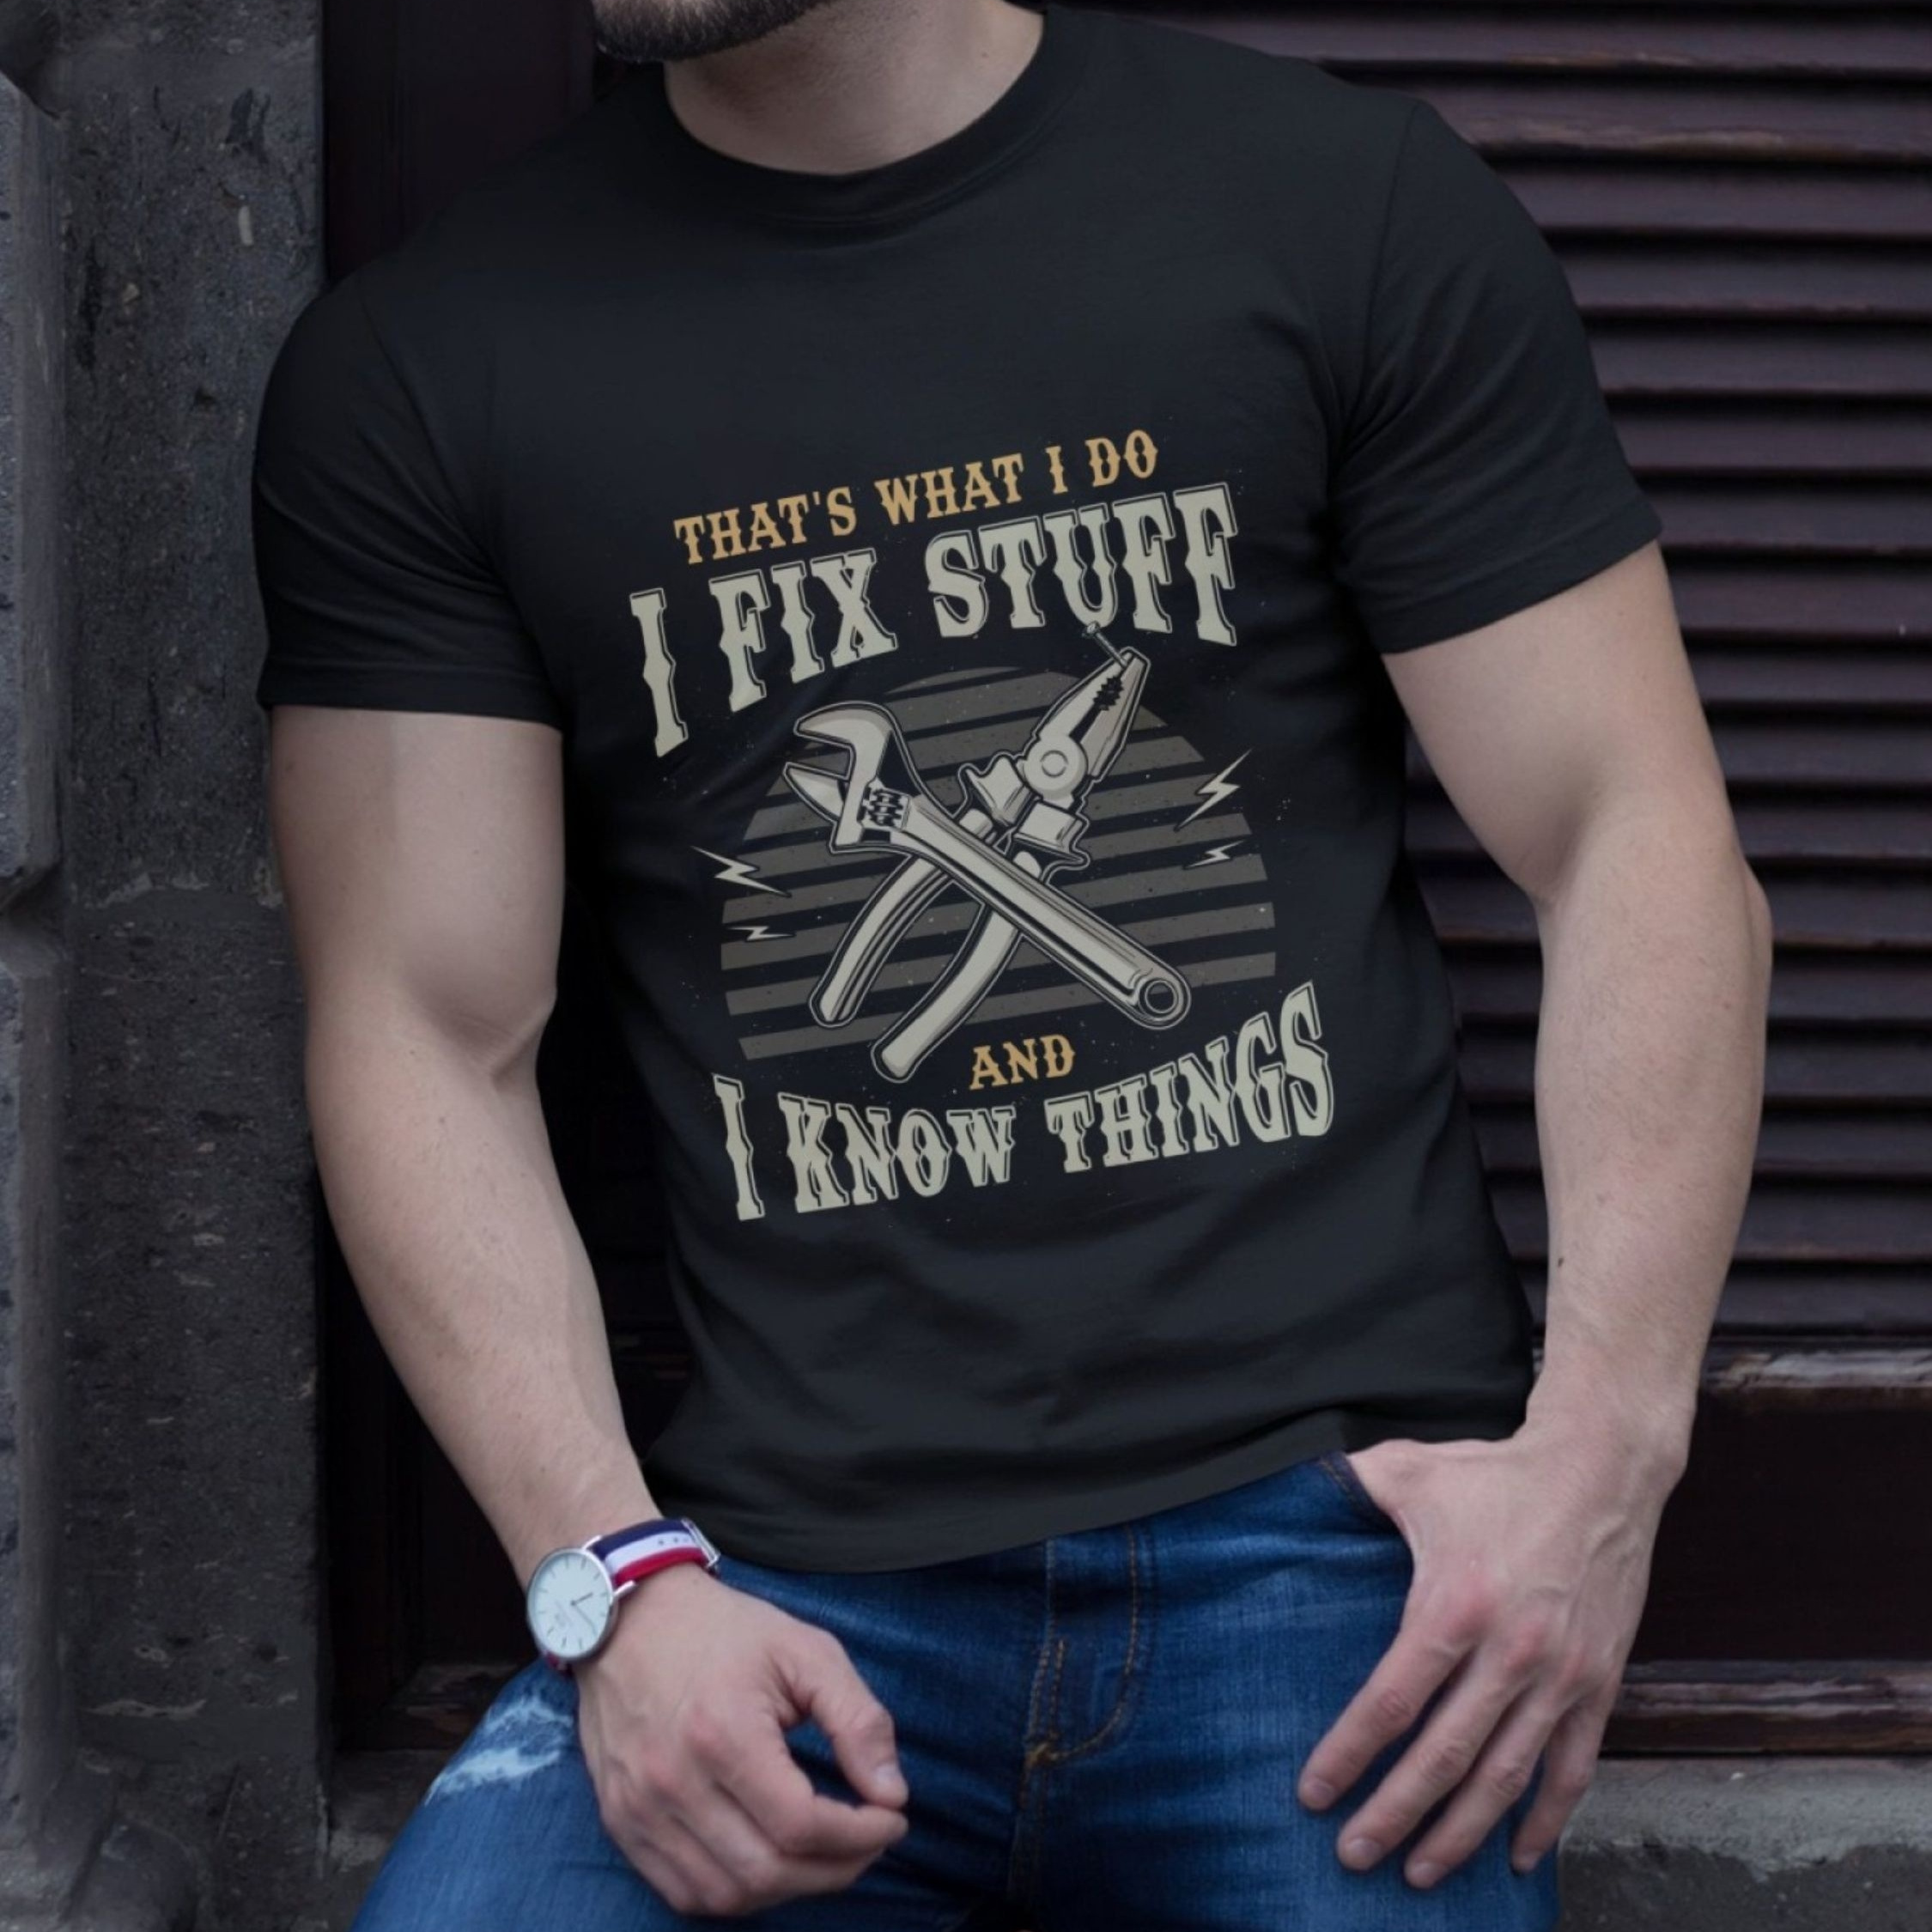 

Men's Short Sleeve T-shirt - Comfortable And Breathable Fabric, Casual Sports Style-i Fix Stuff And Know Things